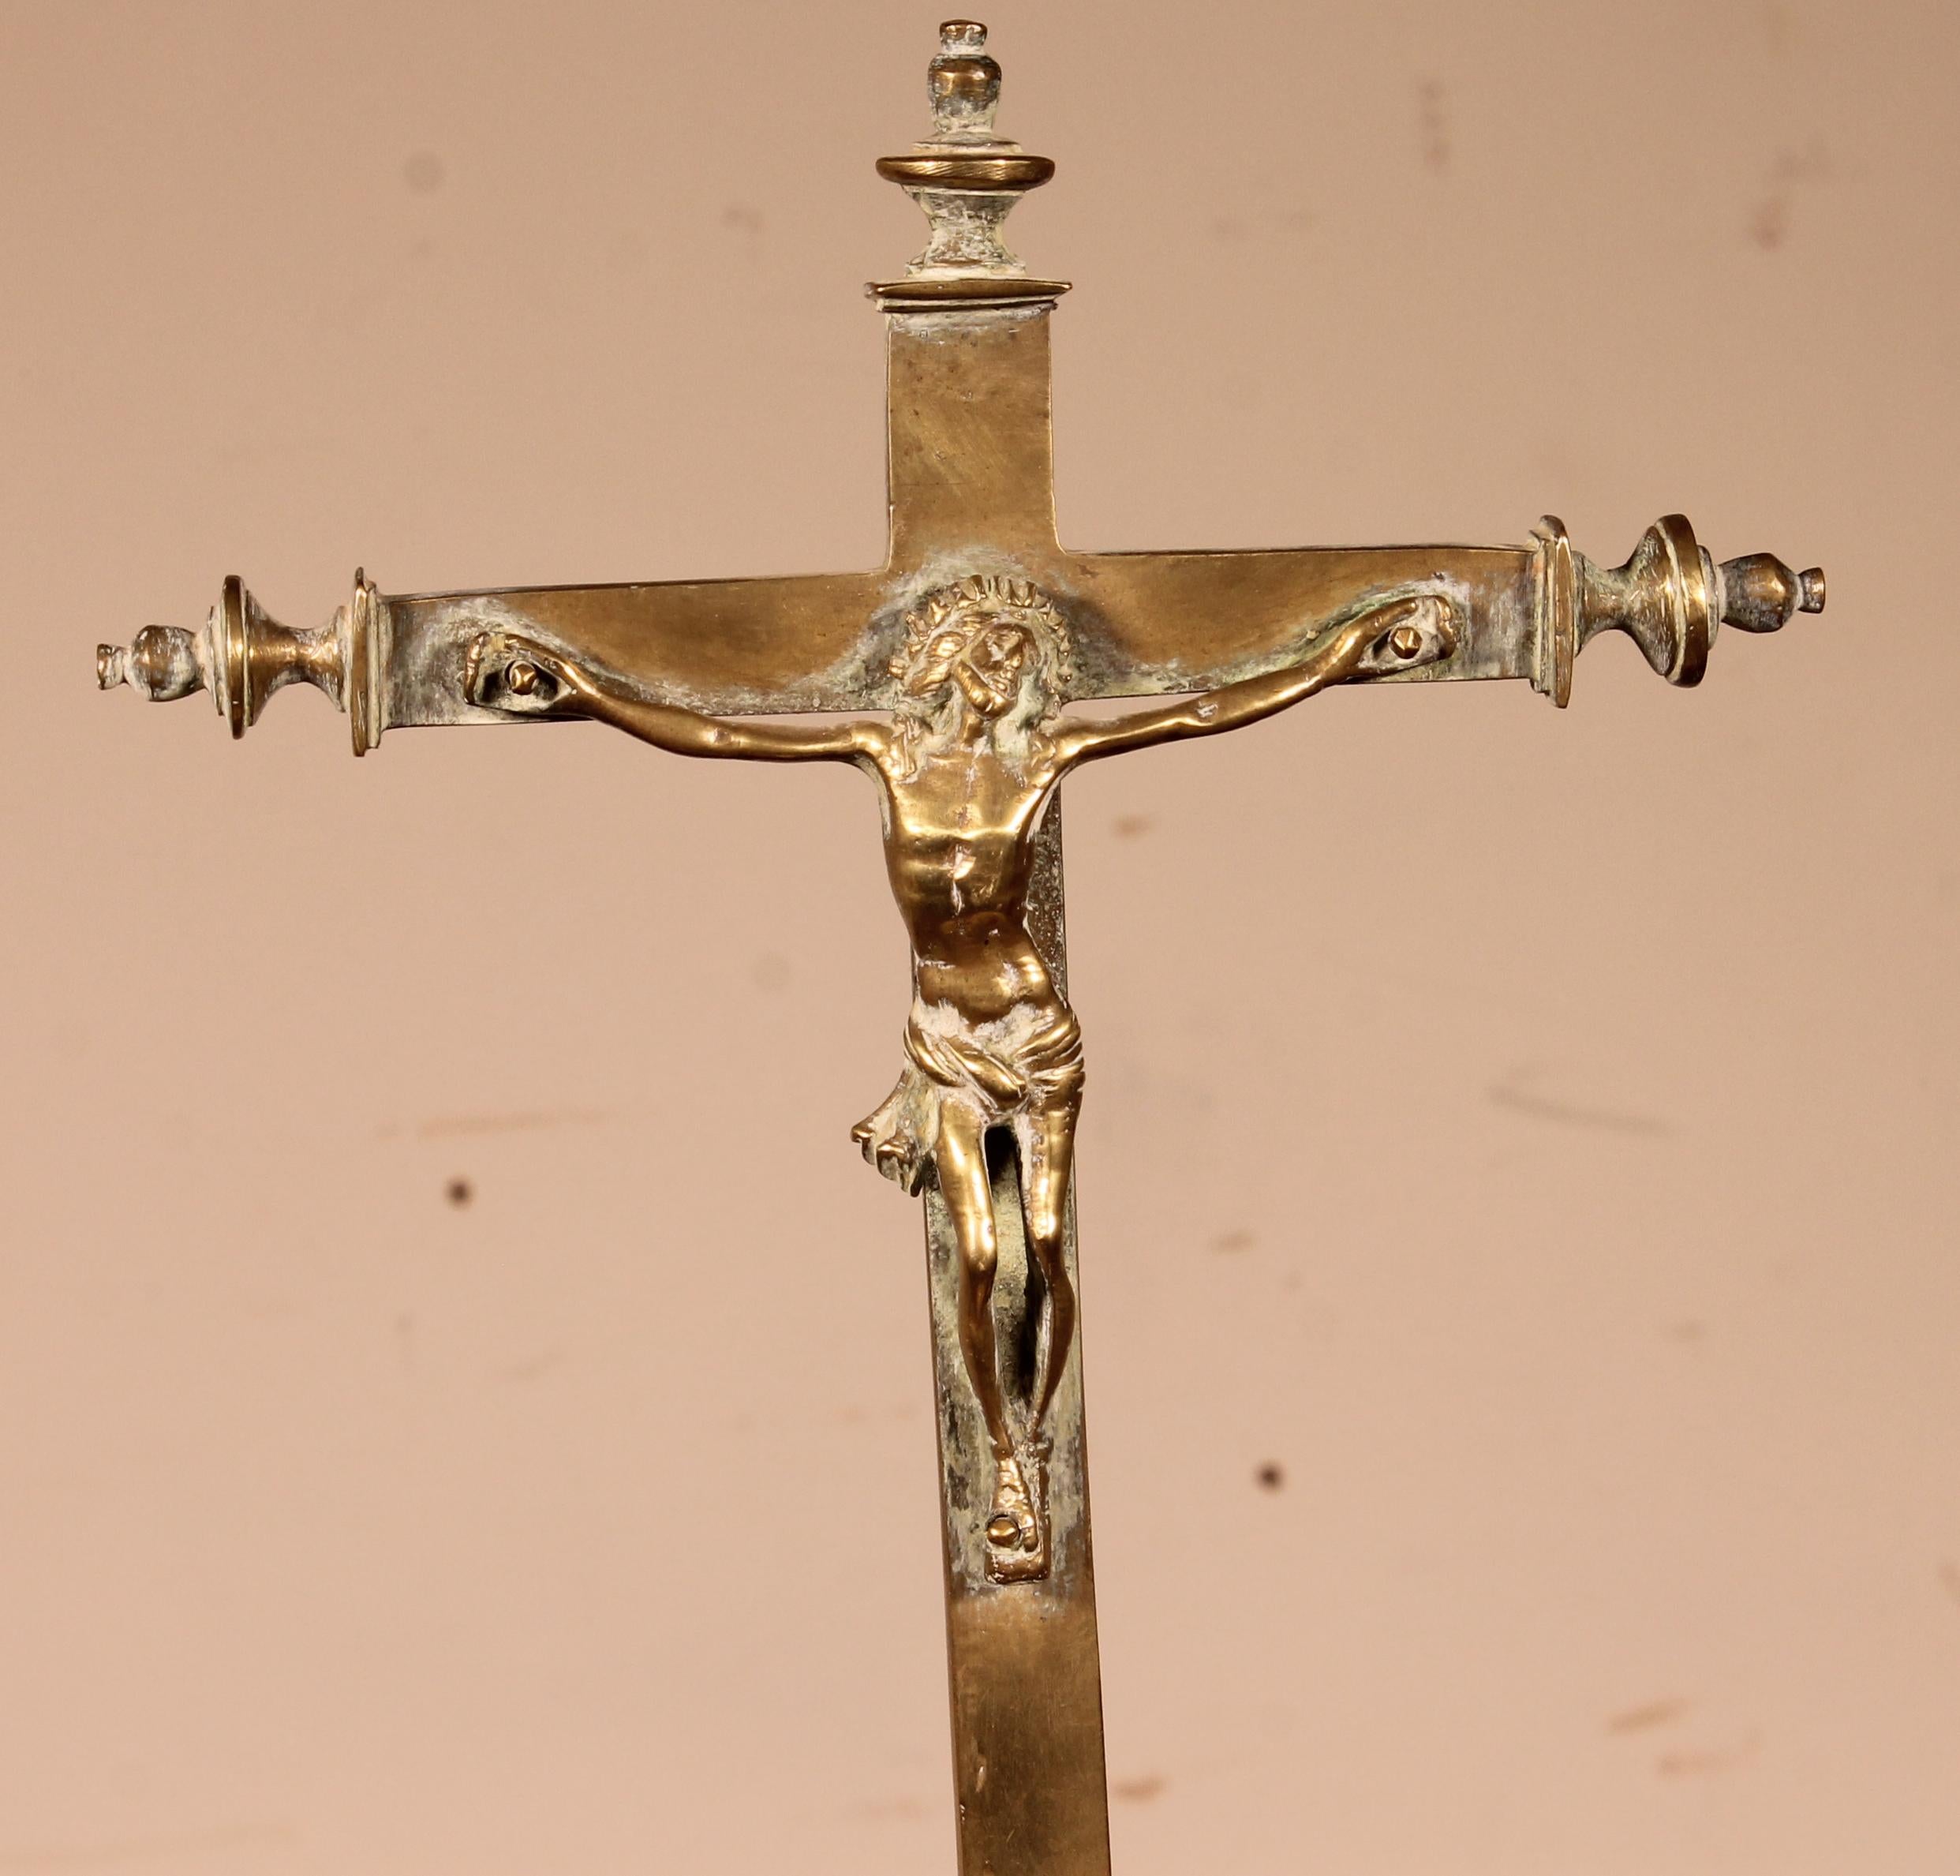 Elegant crucifix in bronze from the 17th century - Spain
Beautiful turning and good quality
Very nice patina and in superb condition.
 